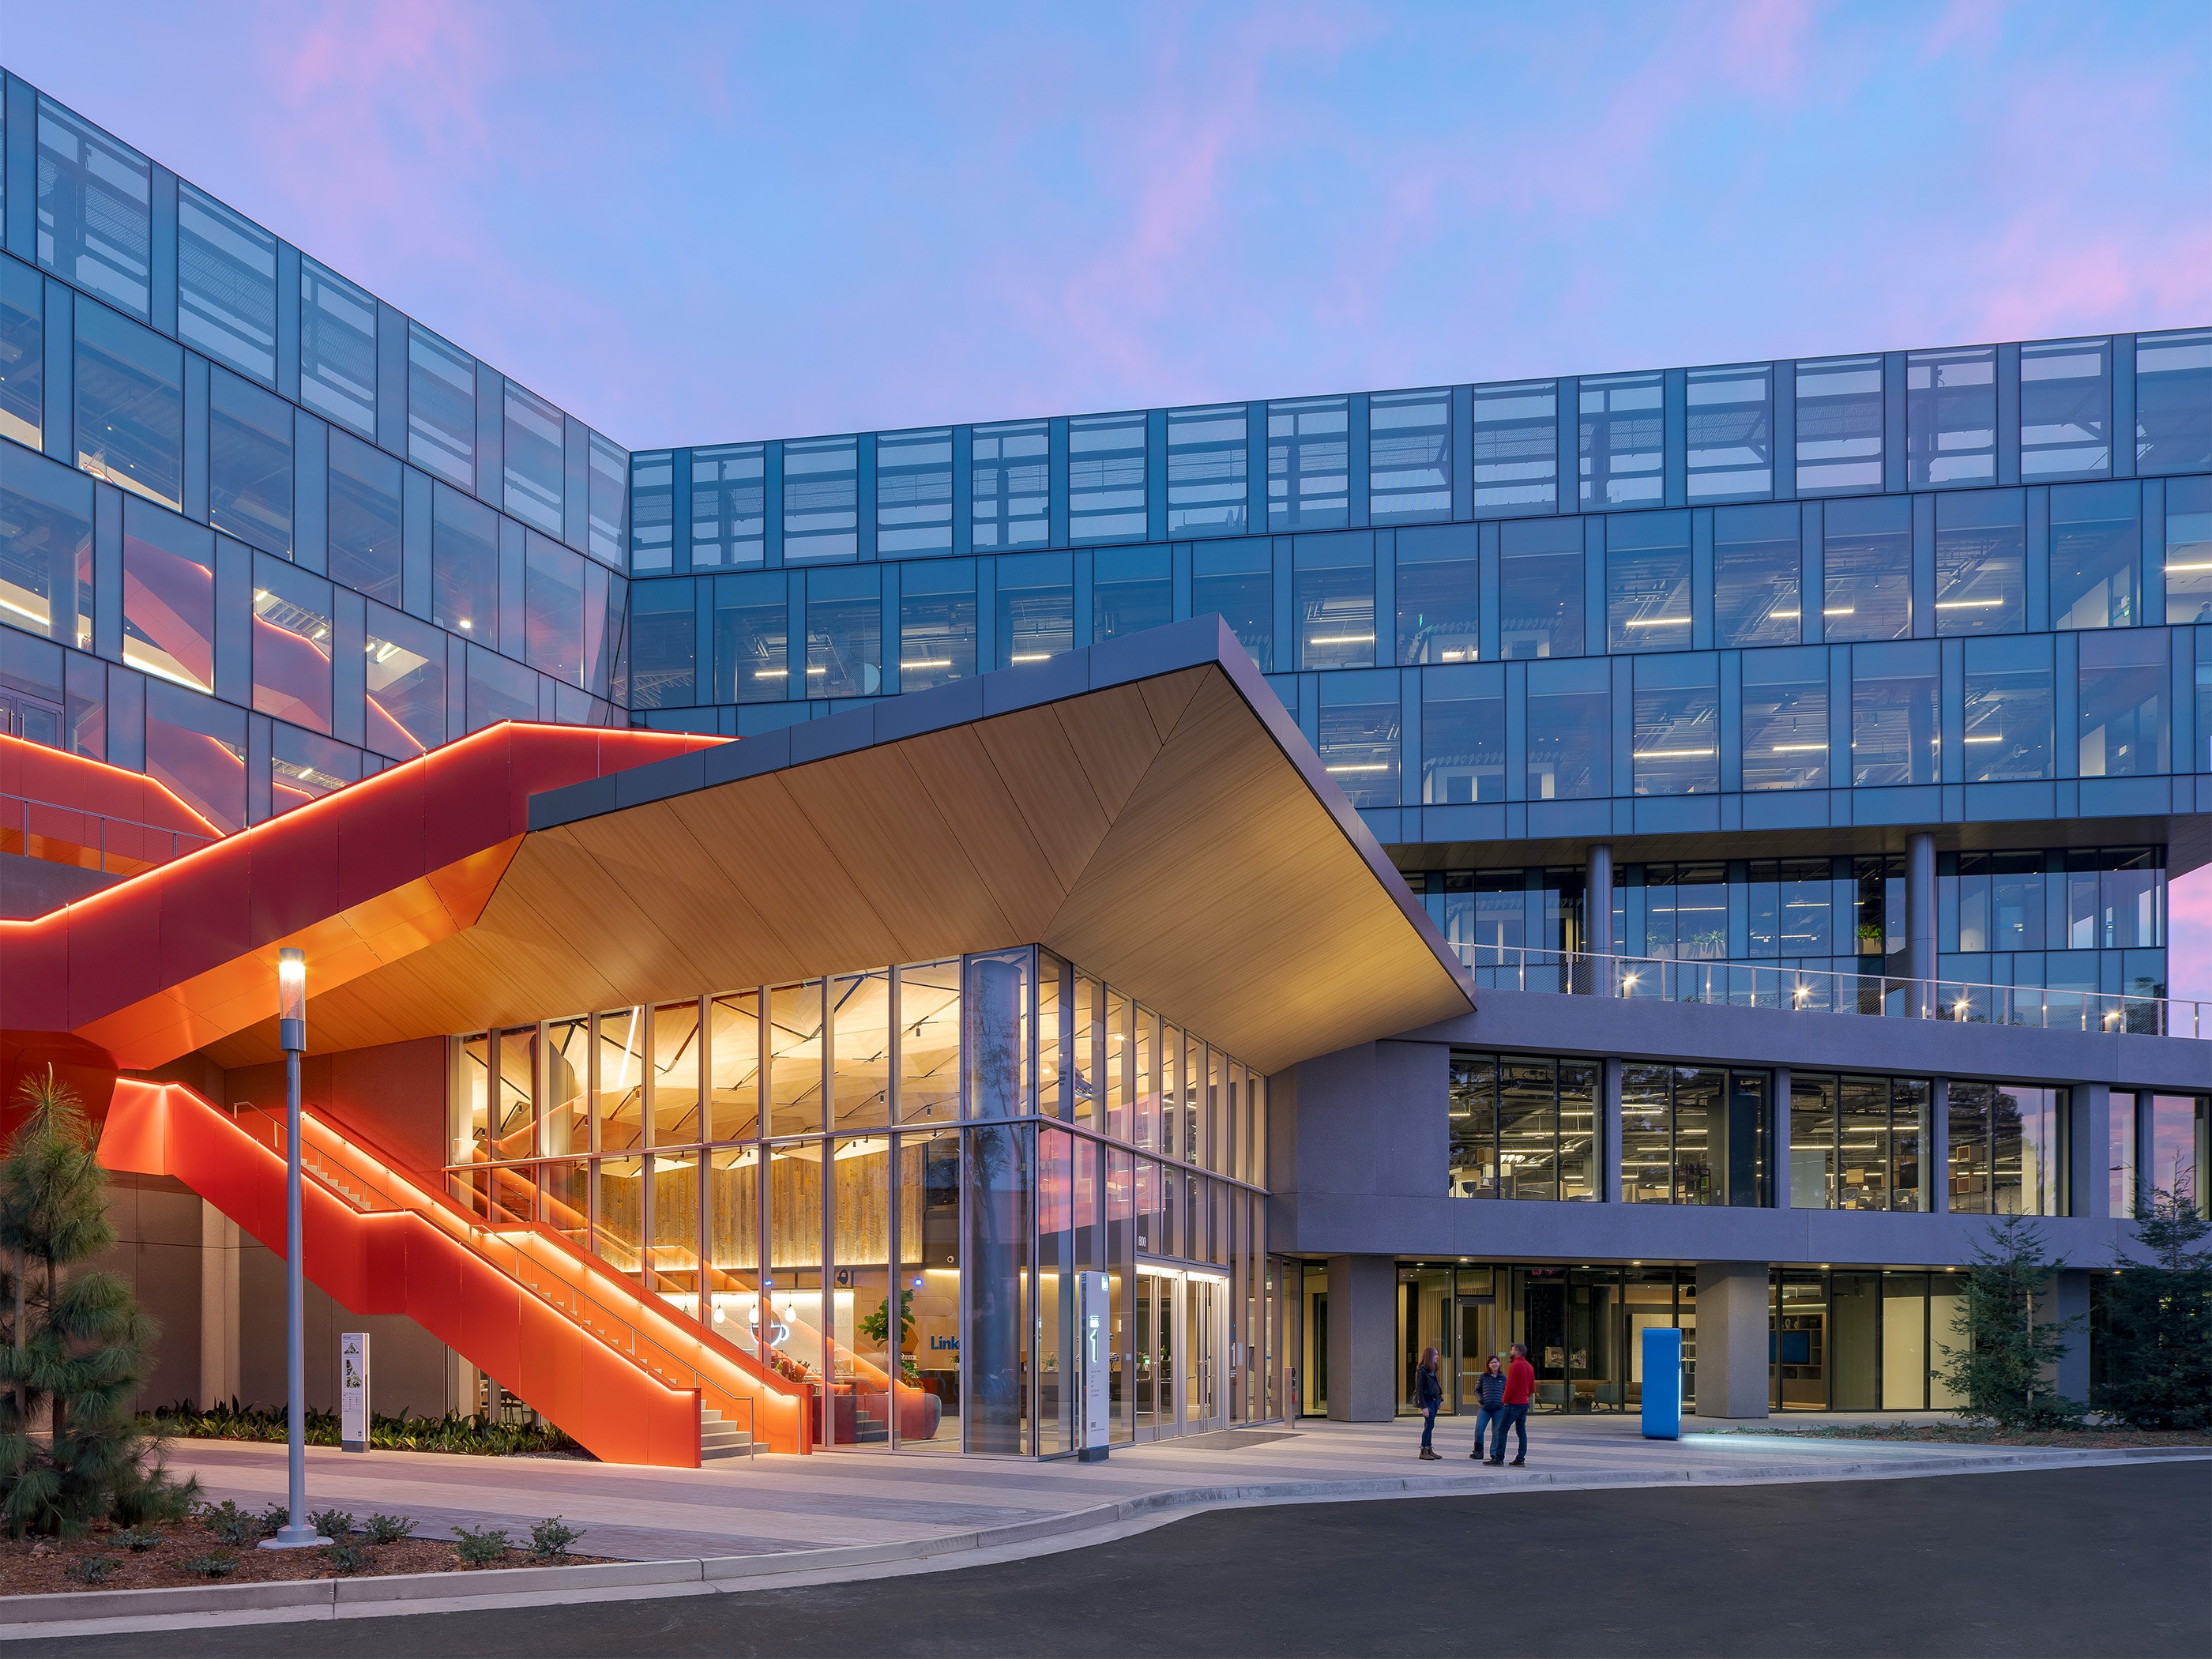 LinkedIn Middlefield Campus design by Studios Architecture